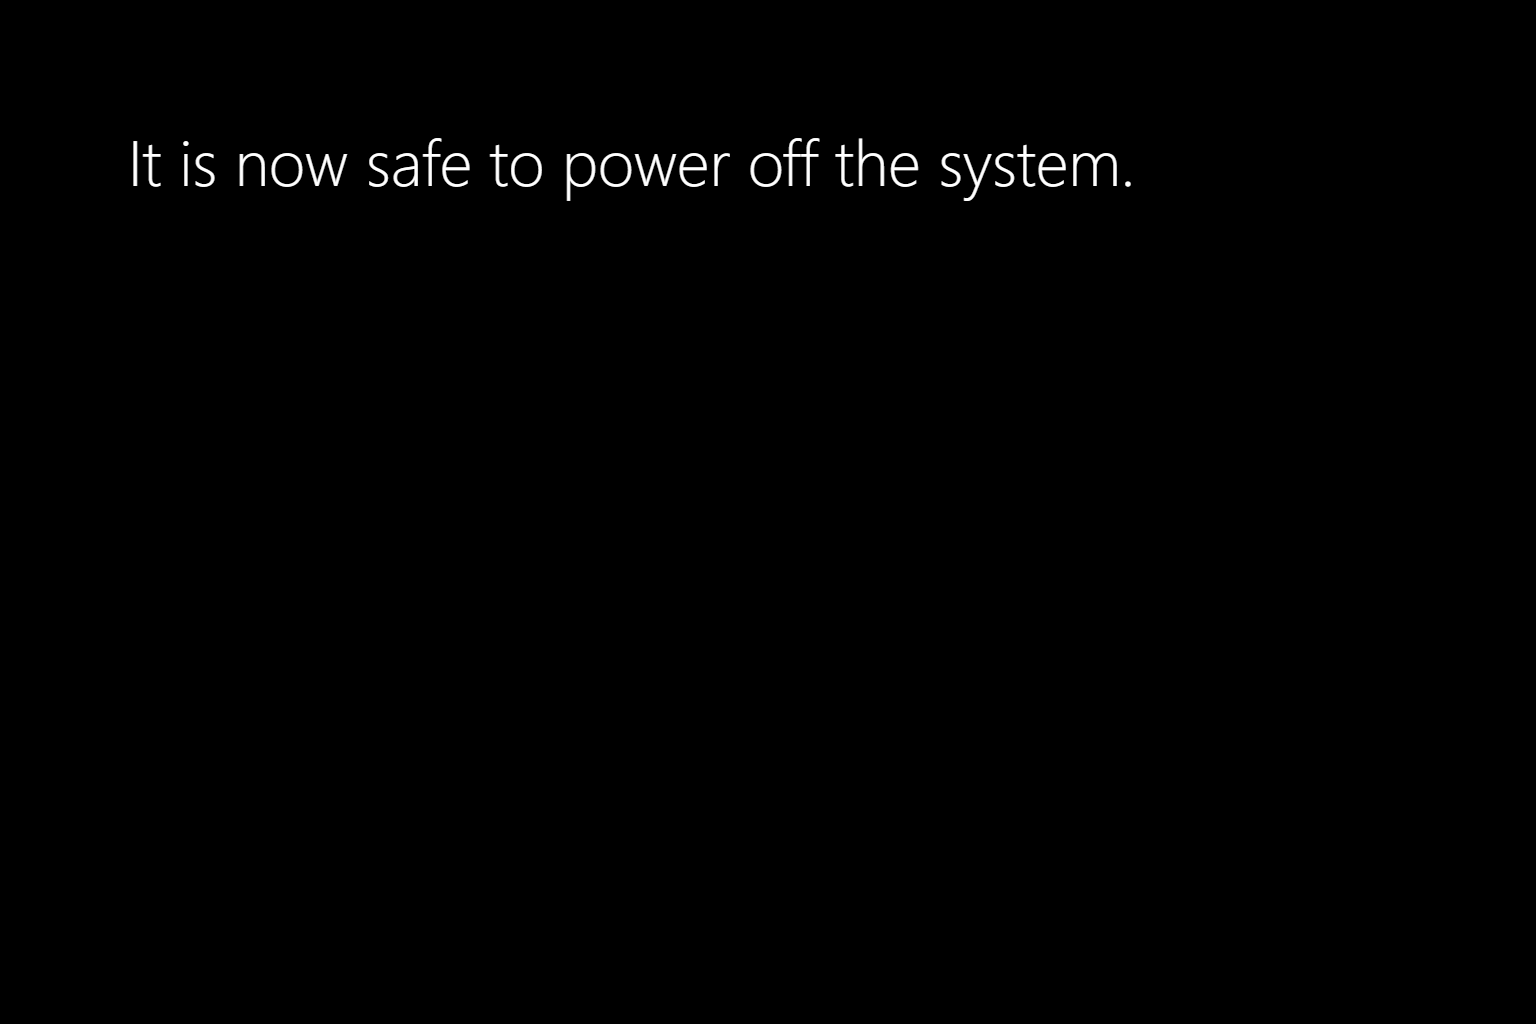 It is now safe to power off the system. The version in Windows 10 in English. Text in Segoe UI and white, at upper-left corner of the screen.